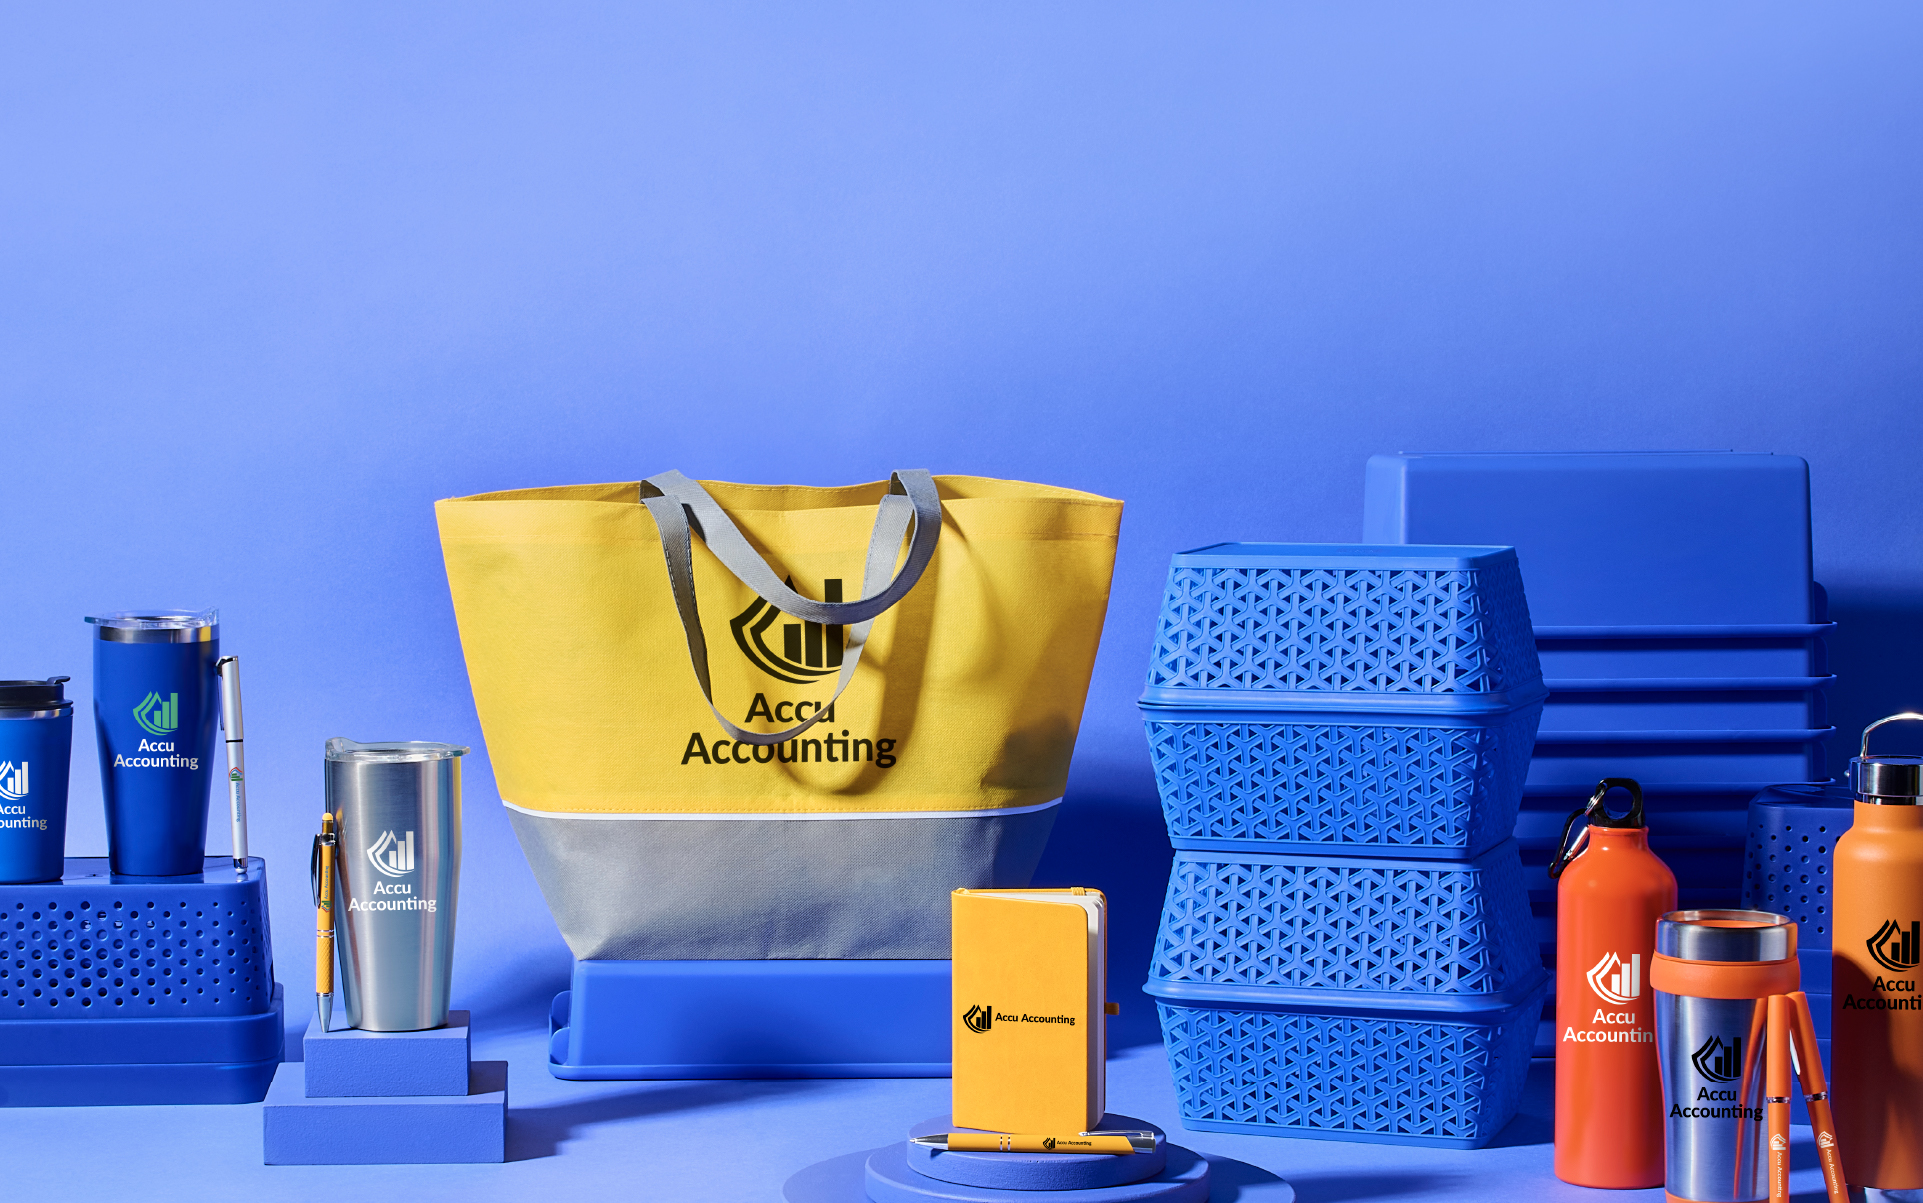 Variety of promotional products for trade show on display